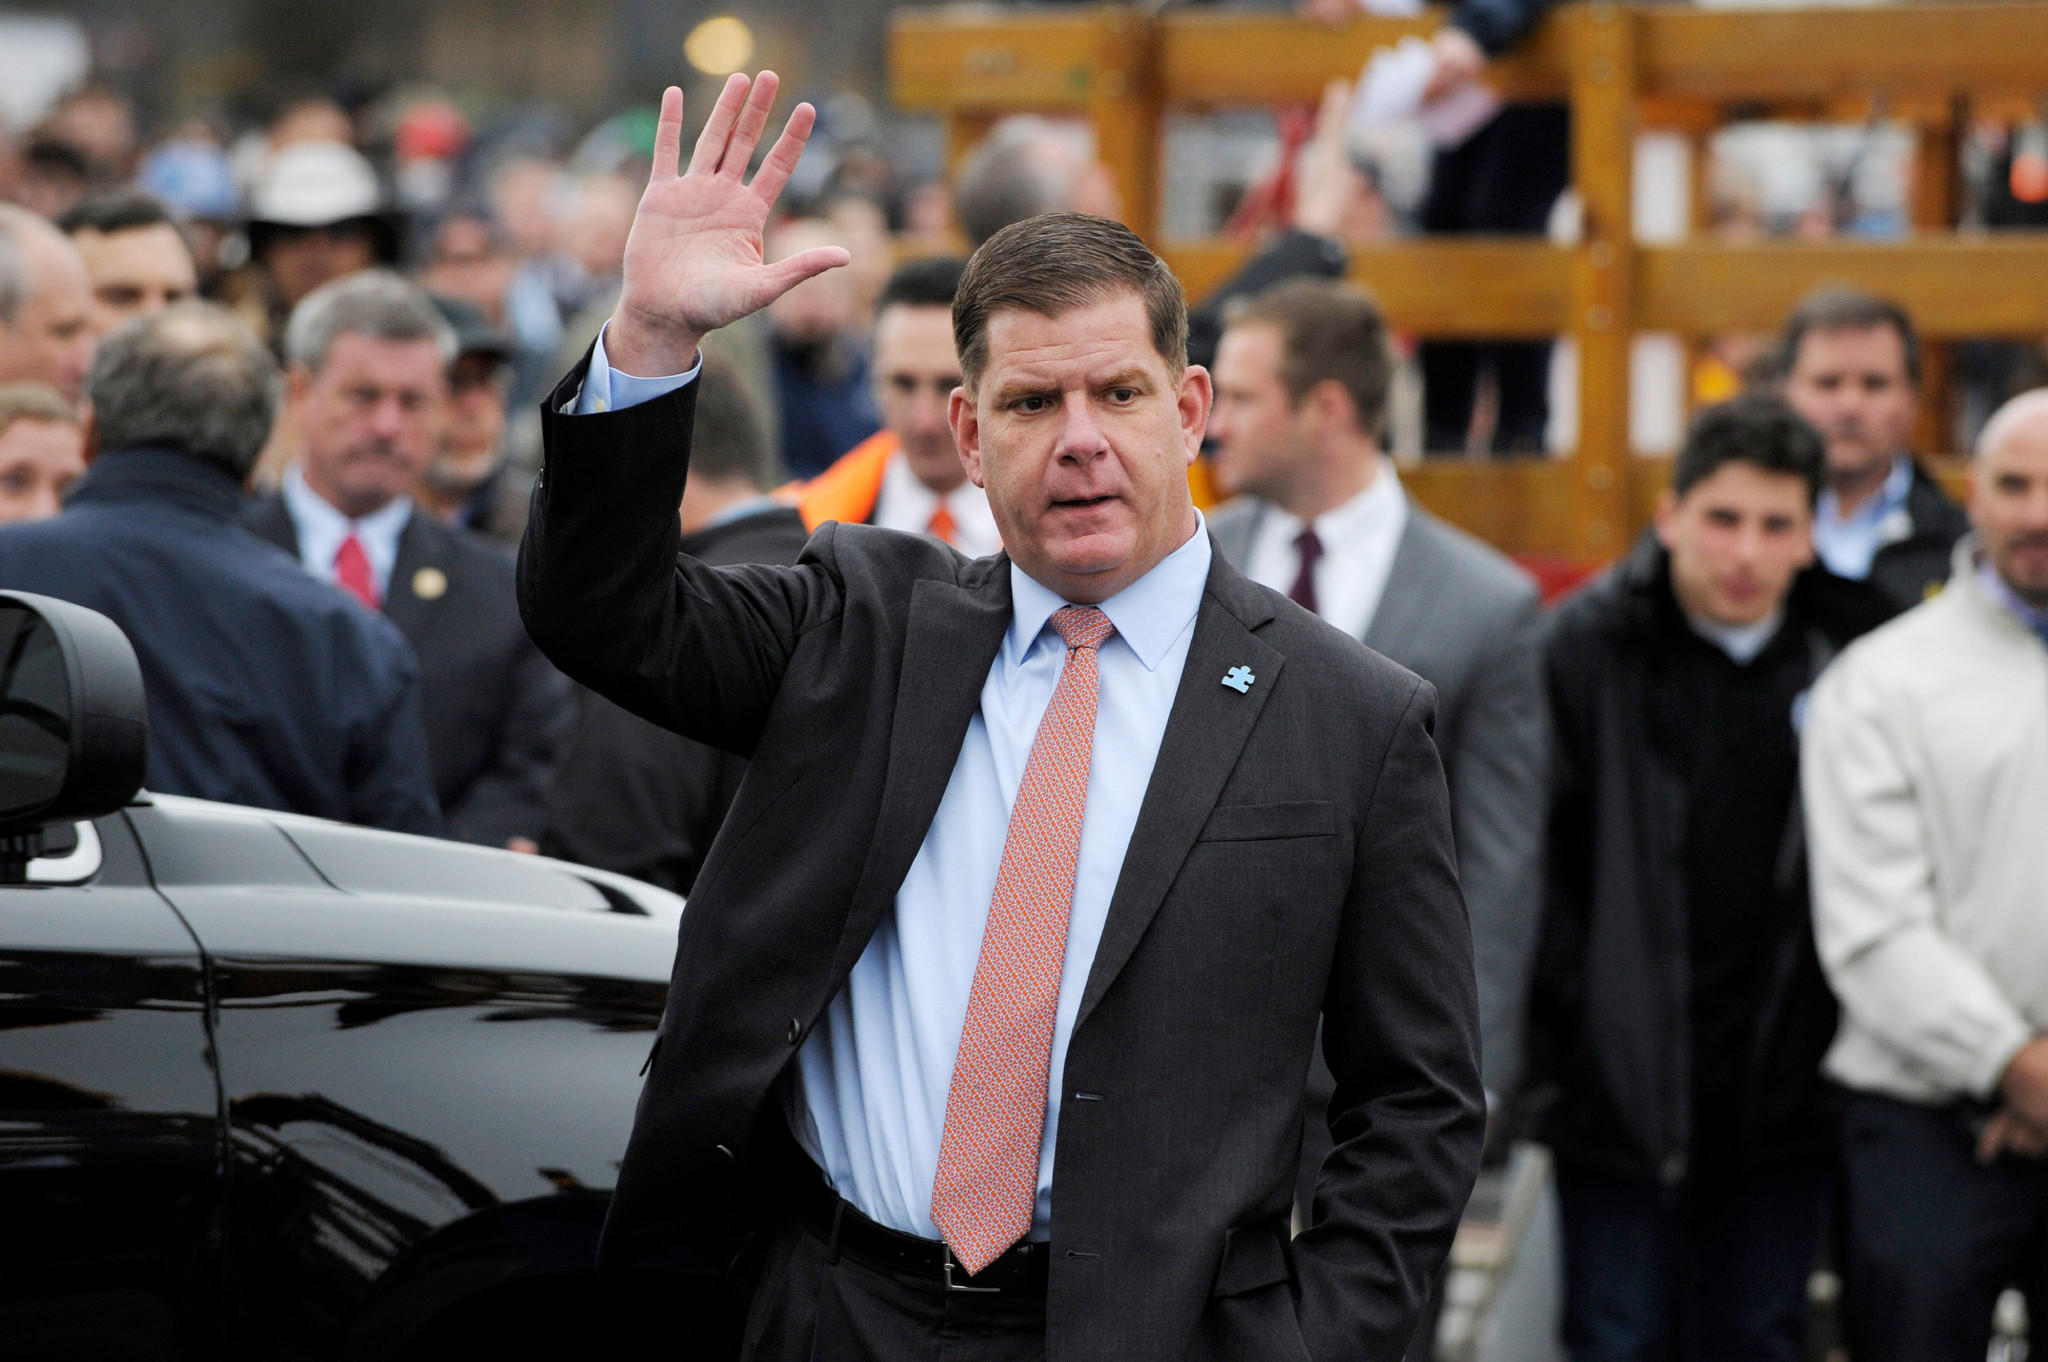 Marty Walsh claimed that scaling back the event on April 20 would be an "overreaction" ©Getty Images